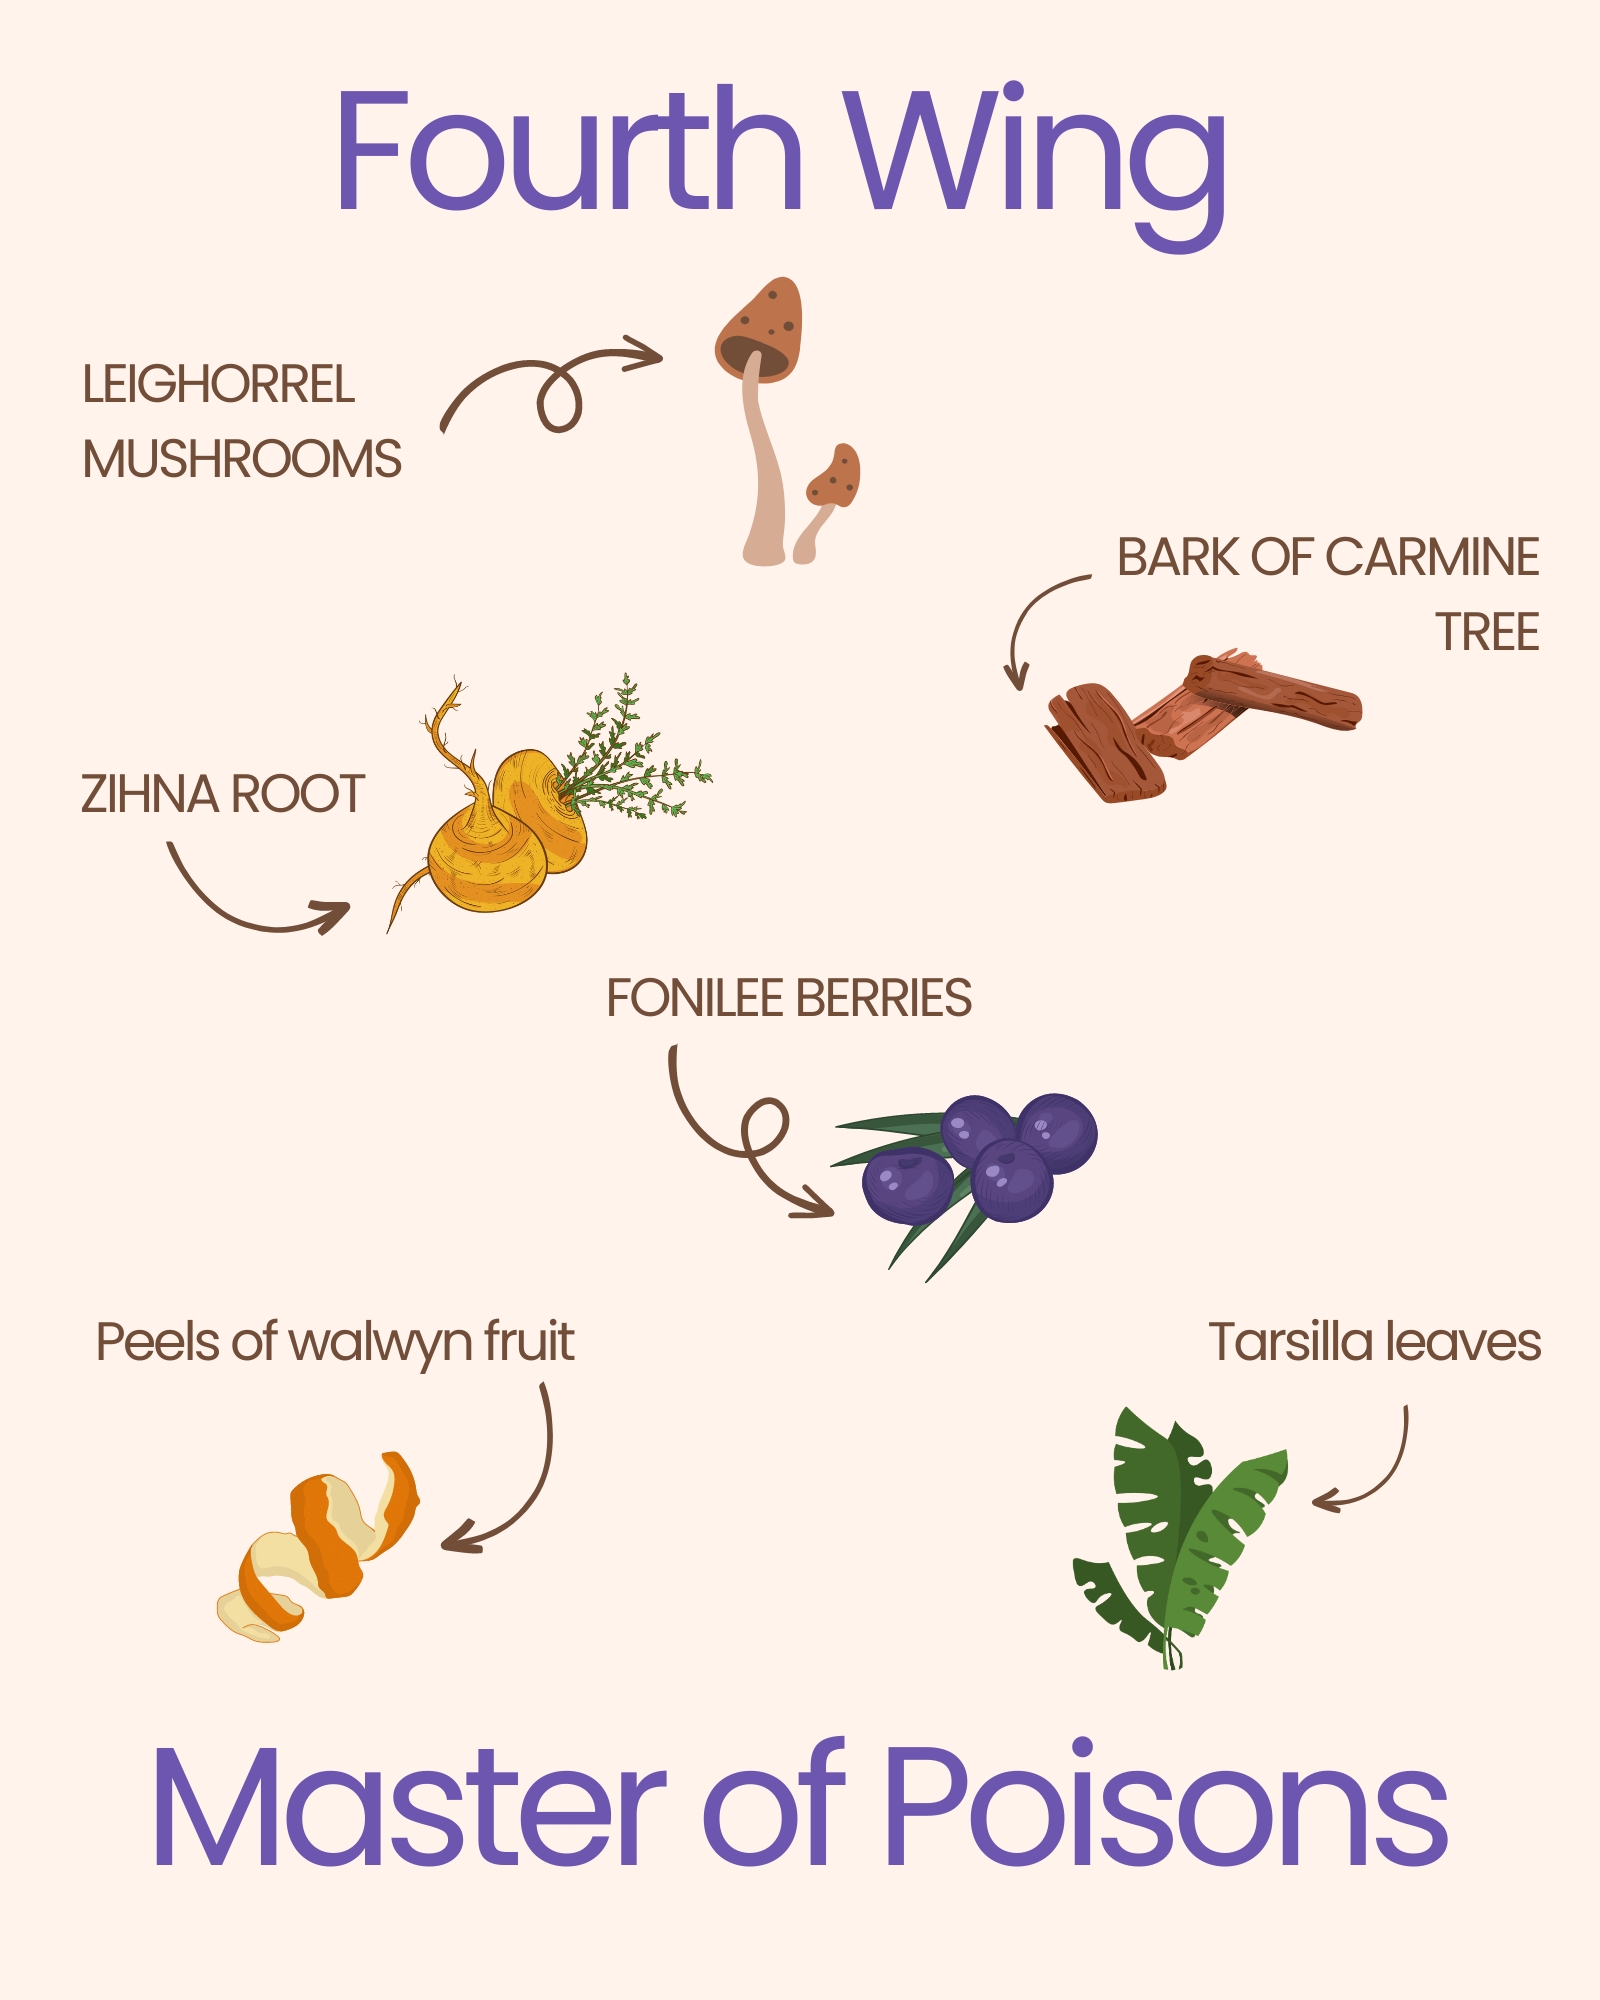 Types of Poisons